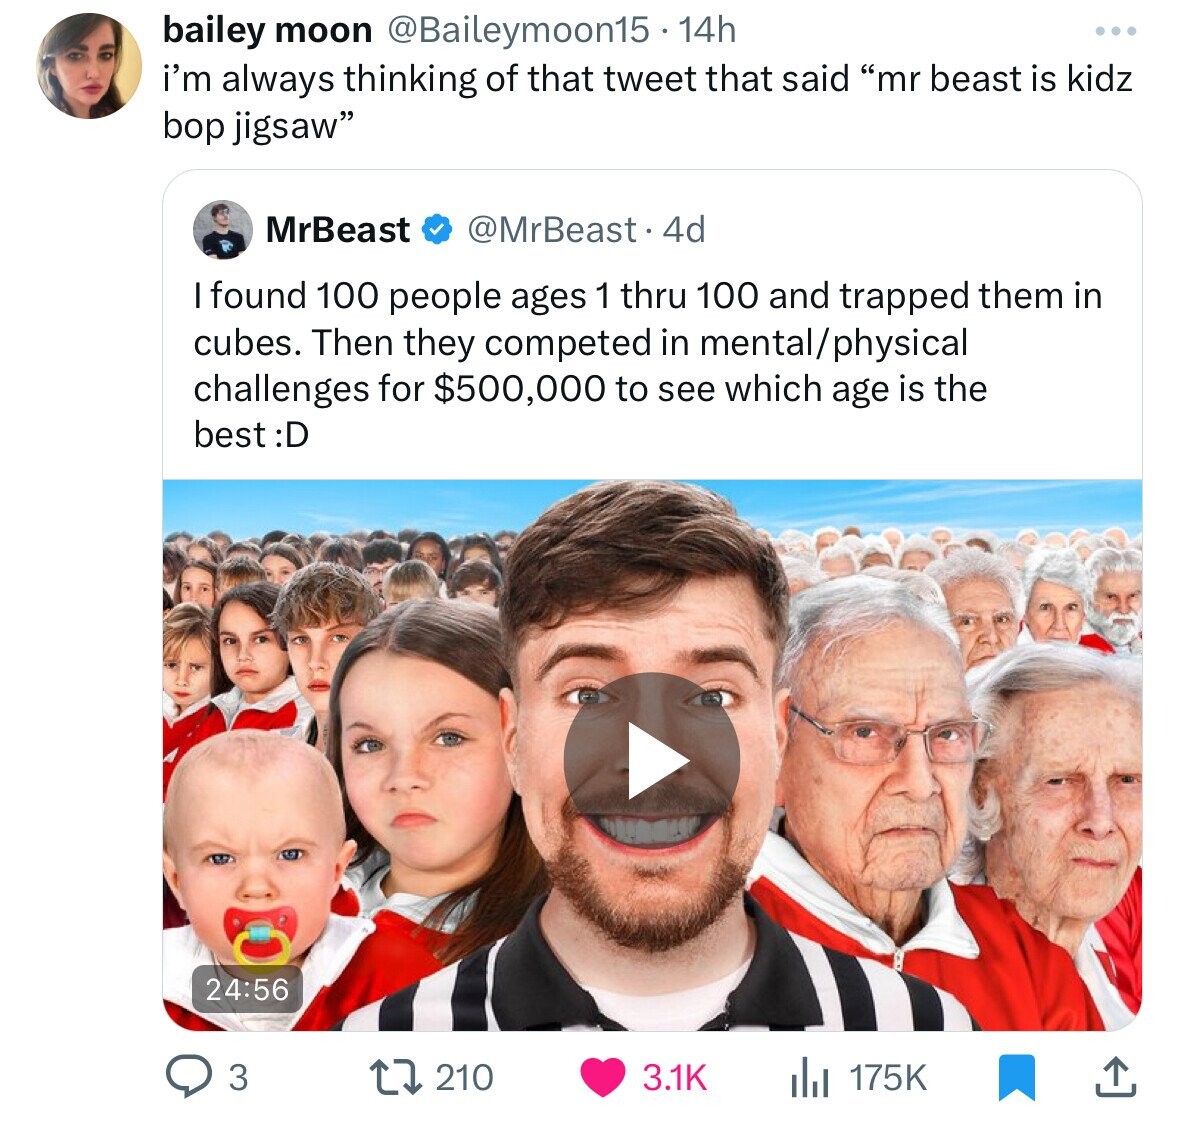 ages 1 100 fight for $500000 - bailey moon 14h i'm always thinking of that tweet that said "mr beast is kidz bop jigsaw" MrBeast 4d I found 100 people ages 1 thru 100 and trapped them in cubes. Then they competed in mentalphysical challenges for $500,000 